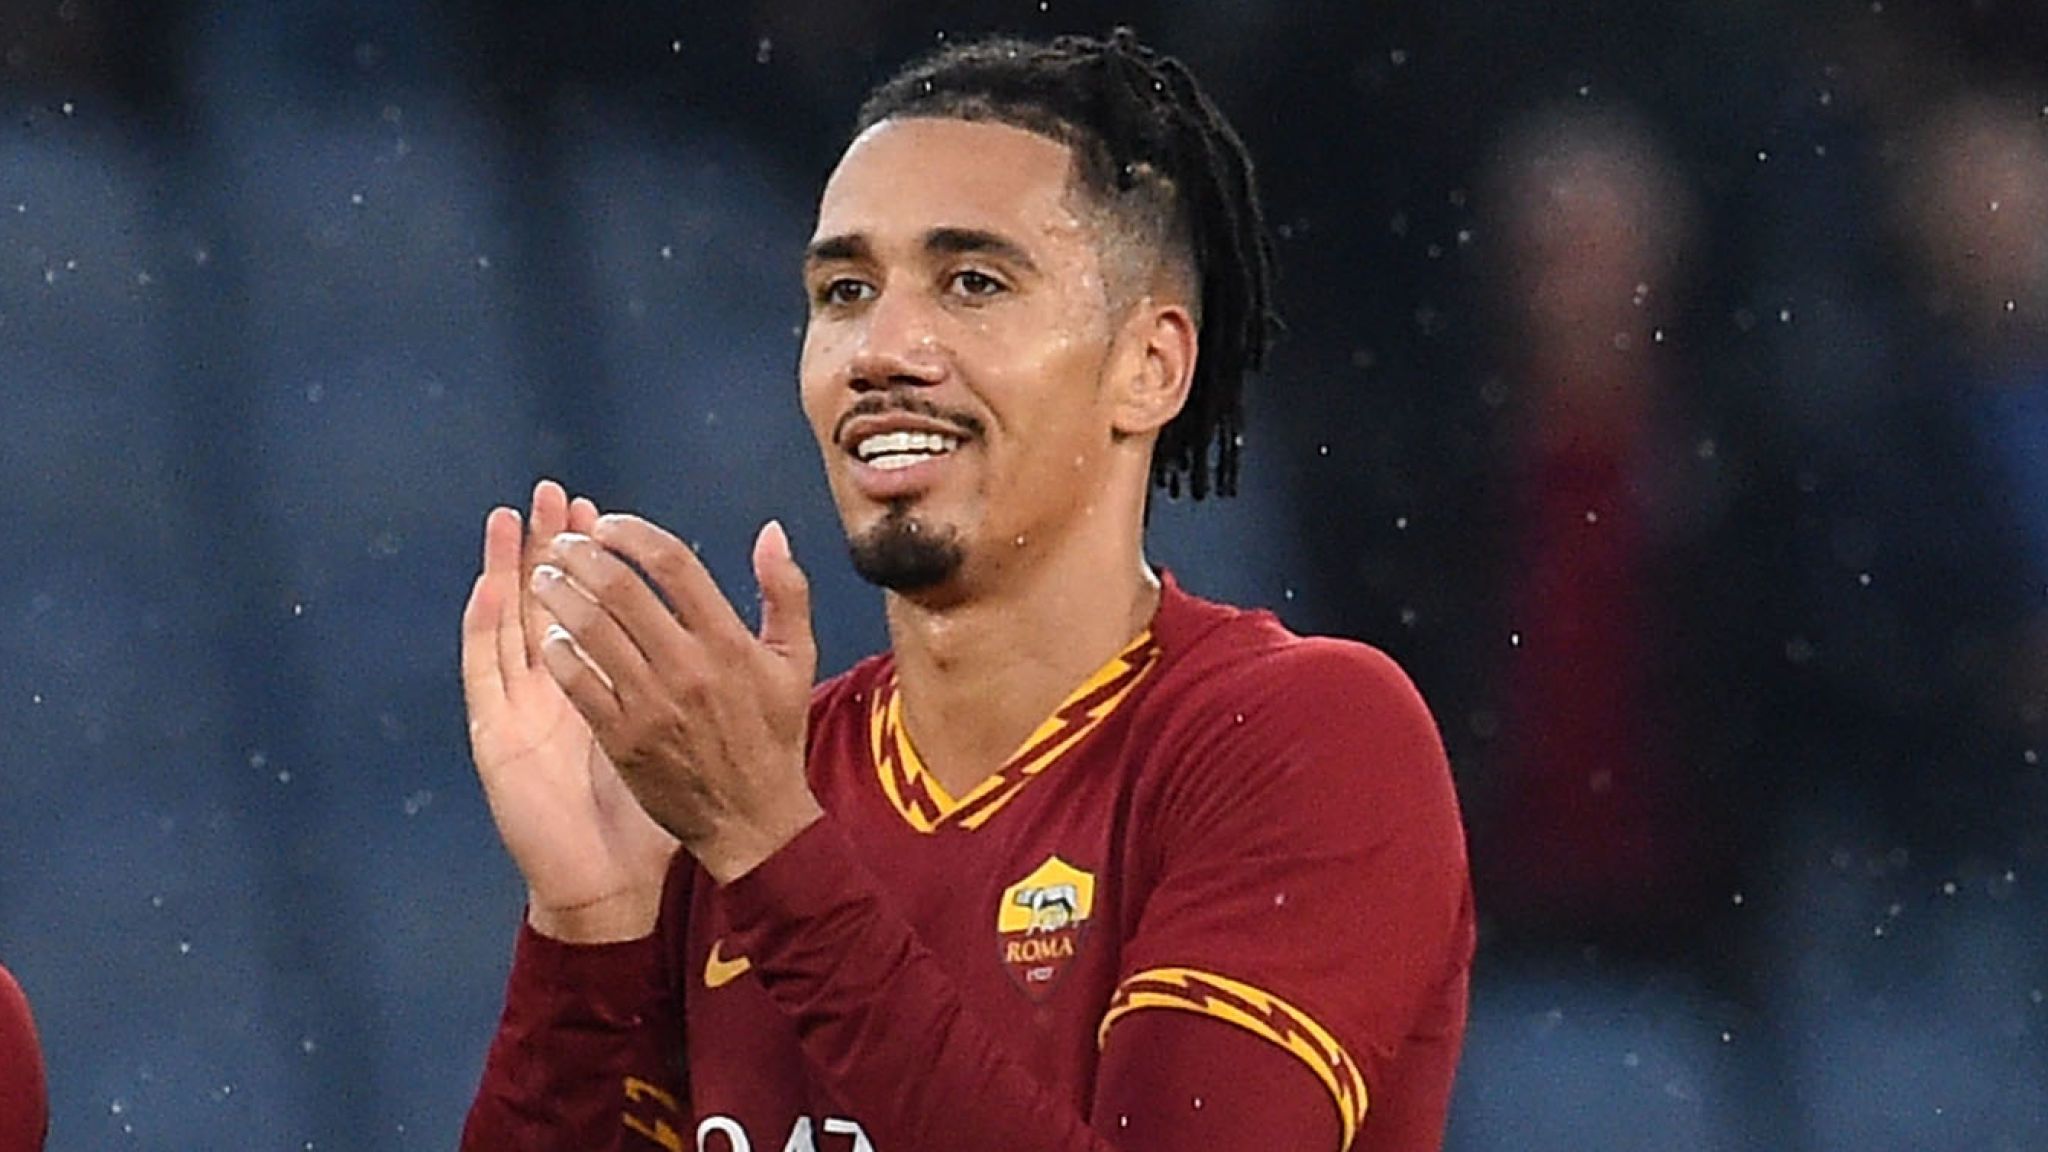 Manchester United 'name their price' for Chris Smalling as Roma eye permanent transfer